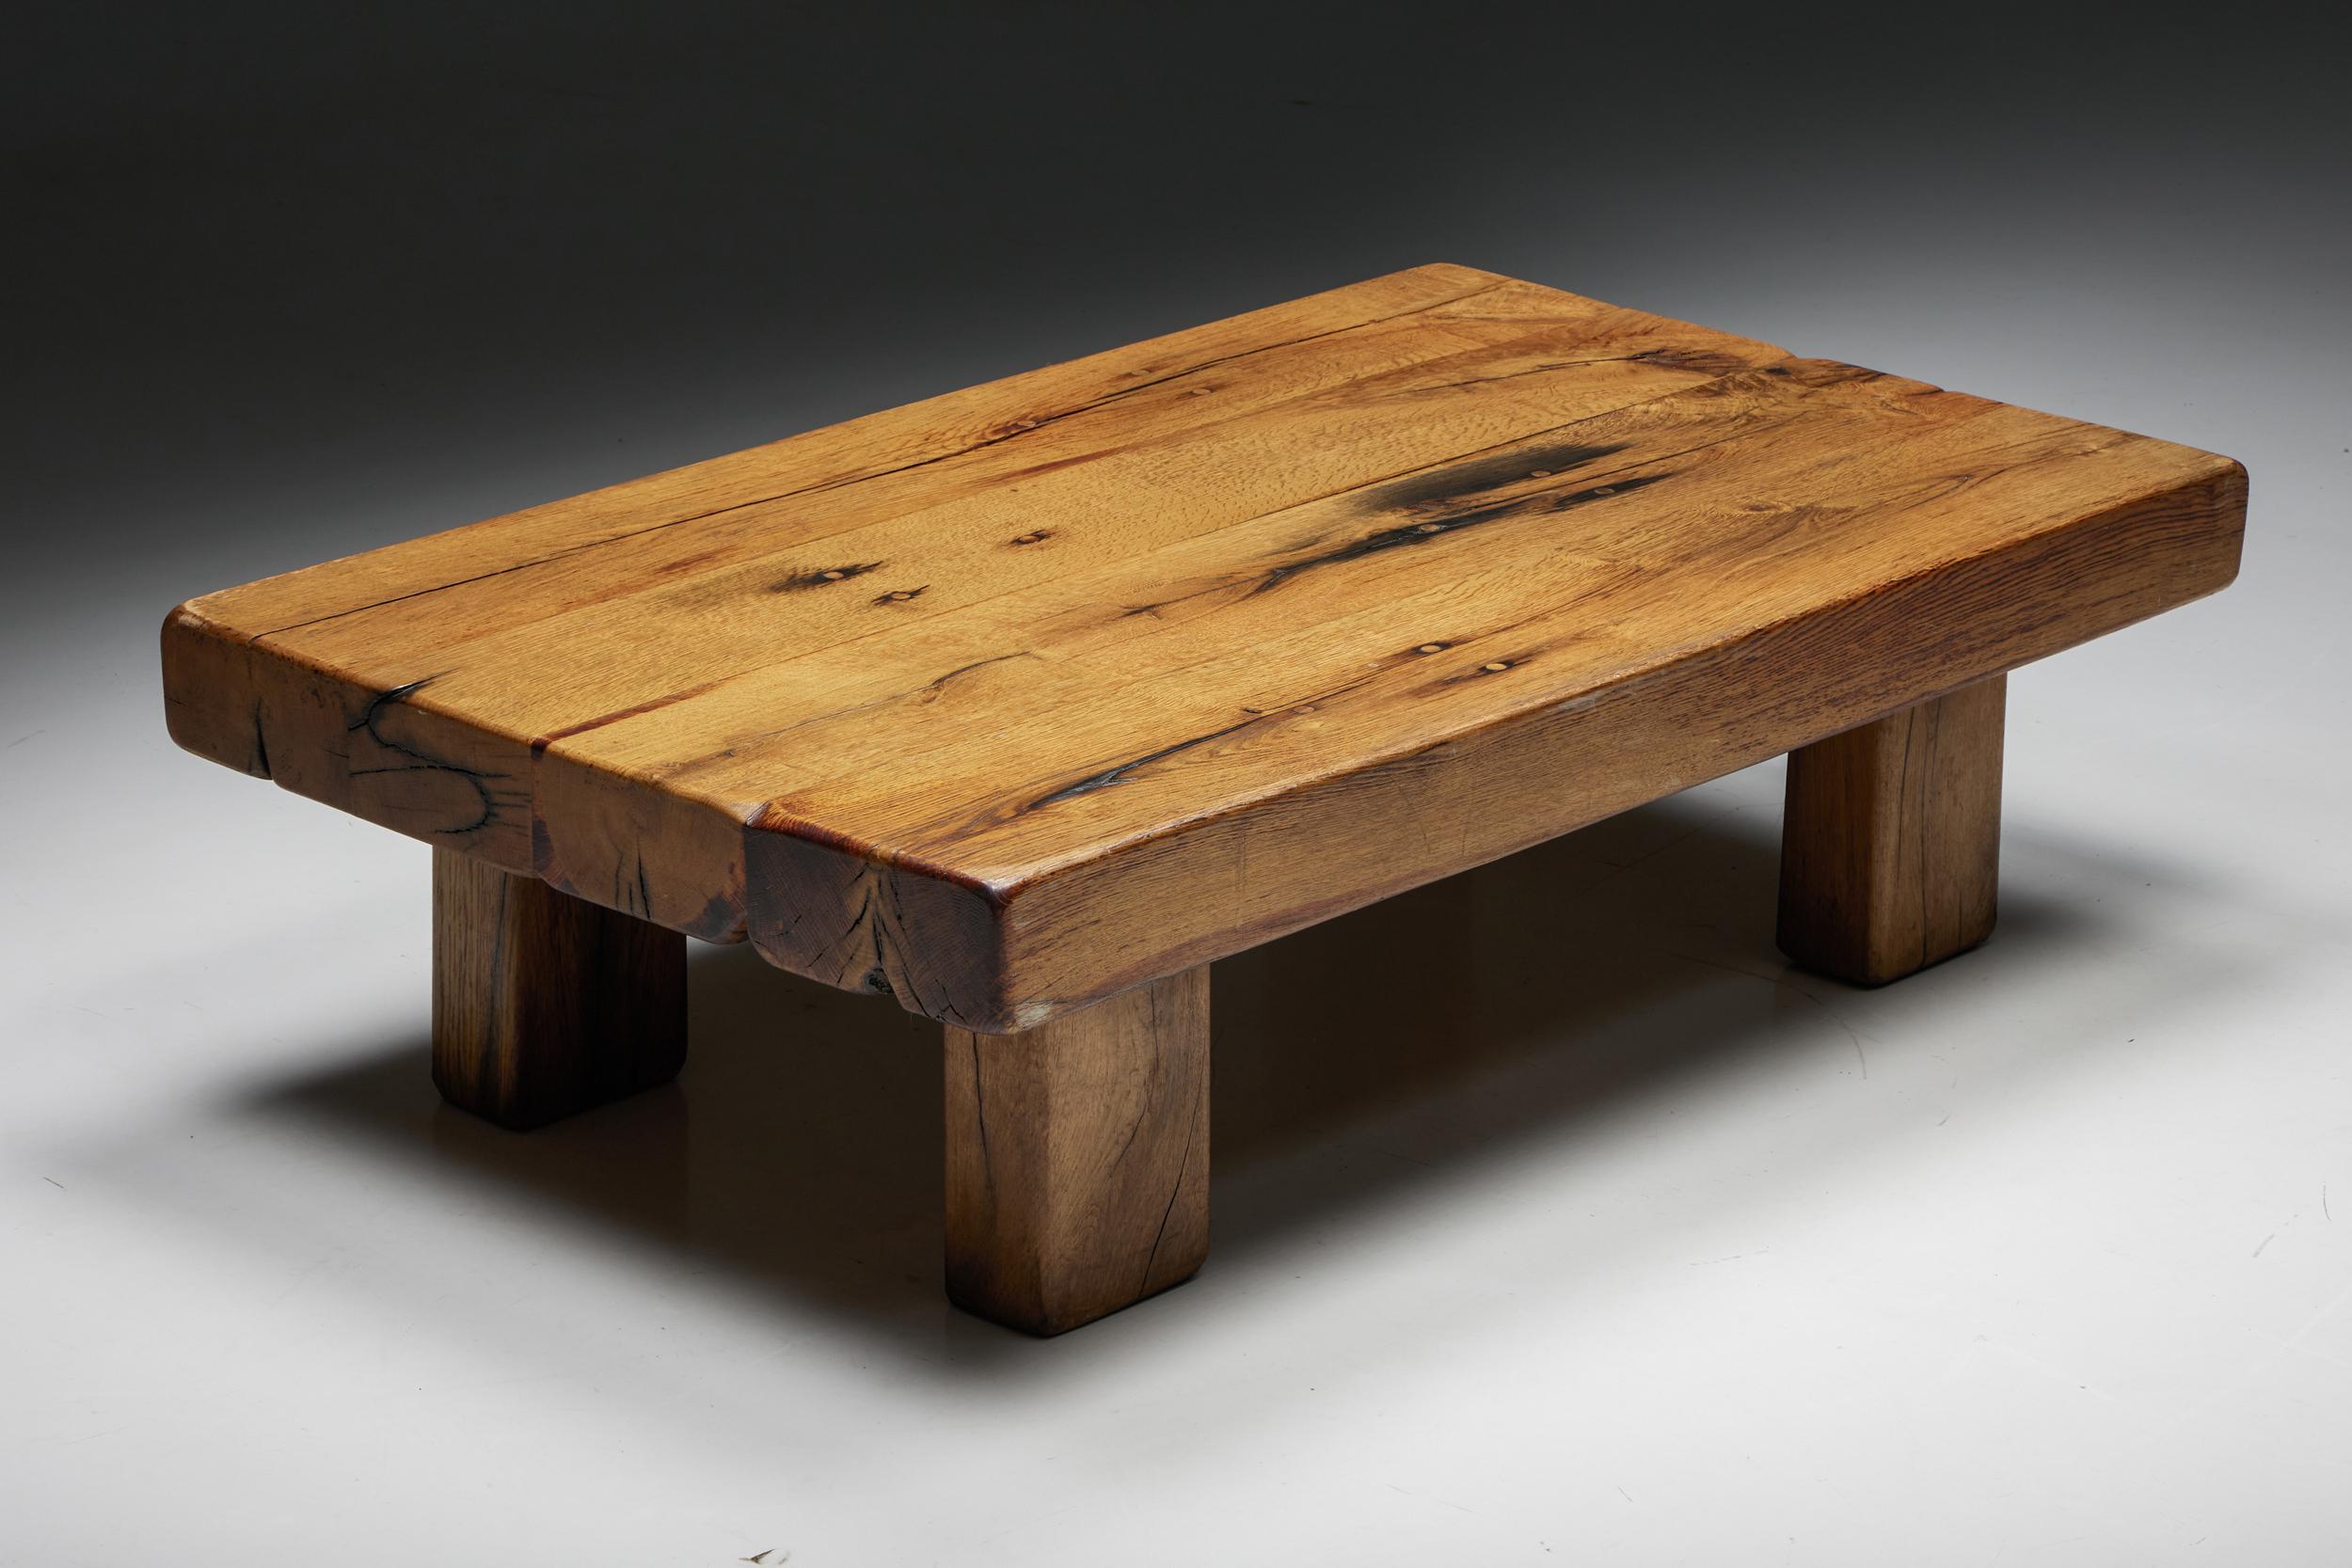 Brutalist; Solid Wood; coffee table; France; 1940s; Rustic; Wabi-Sabi; Coffee Table; Side Table; Wood; Patina; Mid-century Modern; Craftsmanship; Robust; Rustic; Rural; Travail Brutaliste Français;

Rustic artisan brutalist coffee table with a